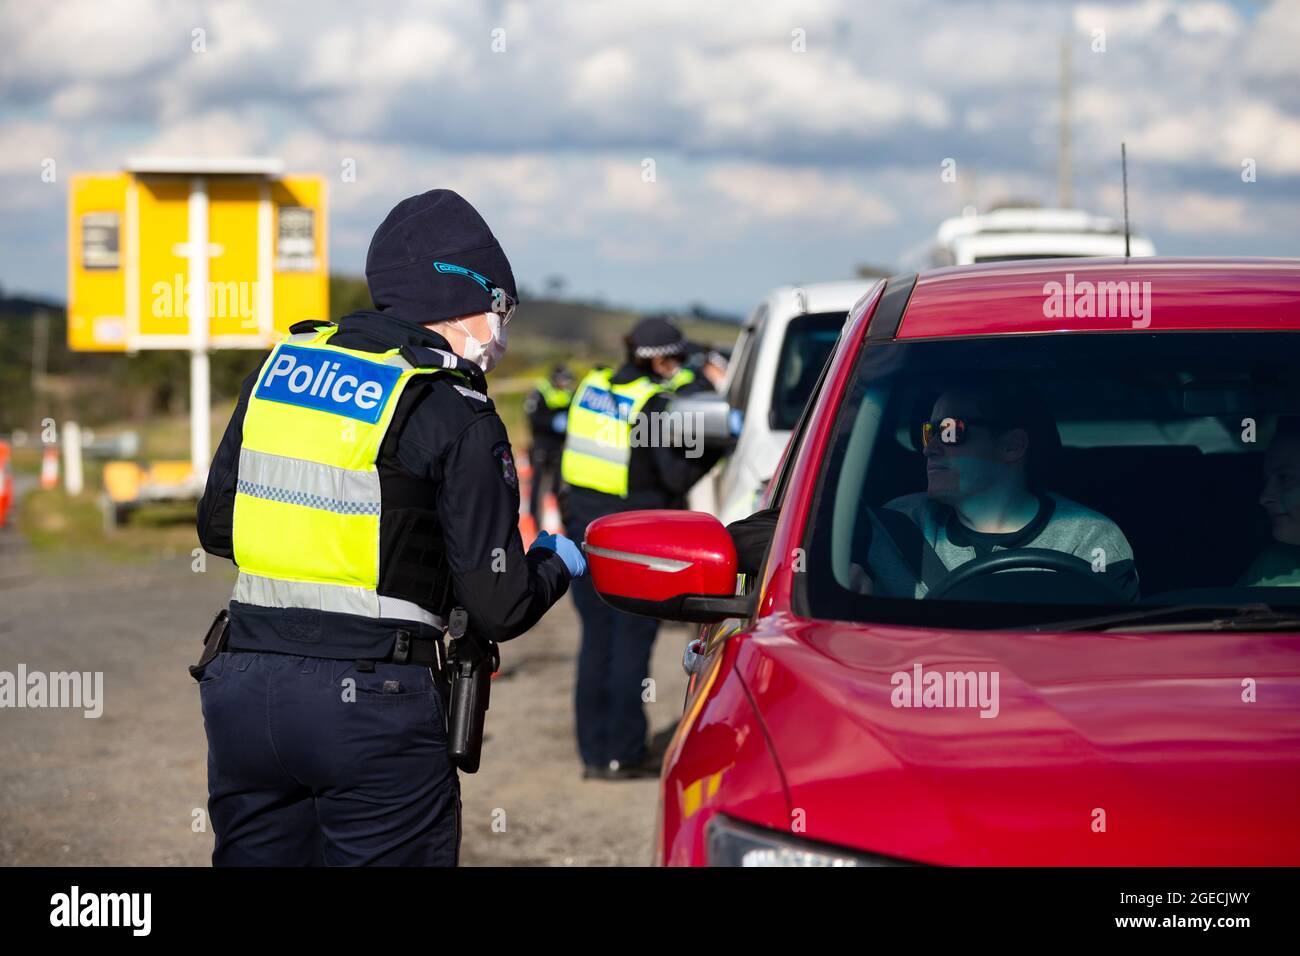 Gisborne, Australia, 9 July, 2020. Police are seen checking drivers  licences at a roadblock south of Gisborne as Melbourne plunges back into  Stage 3 lockdowns during COVID-19. After a sustained outbreak across